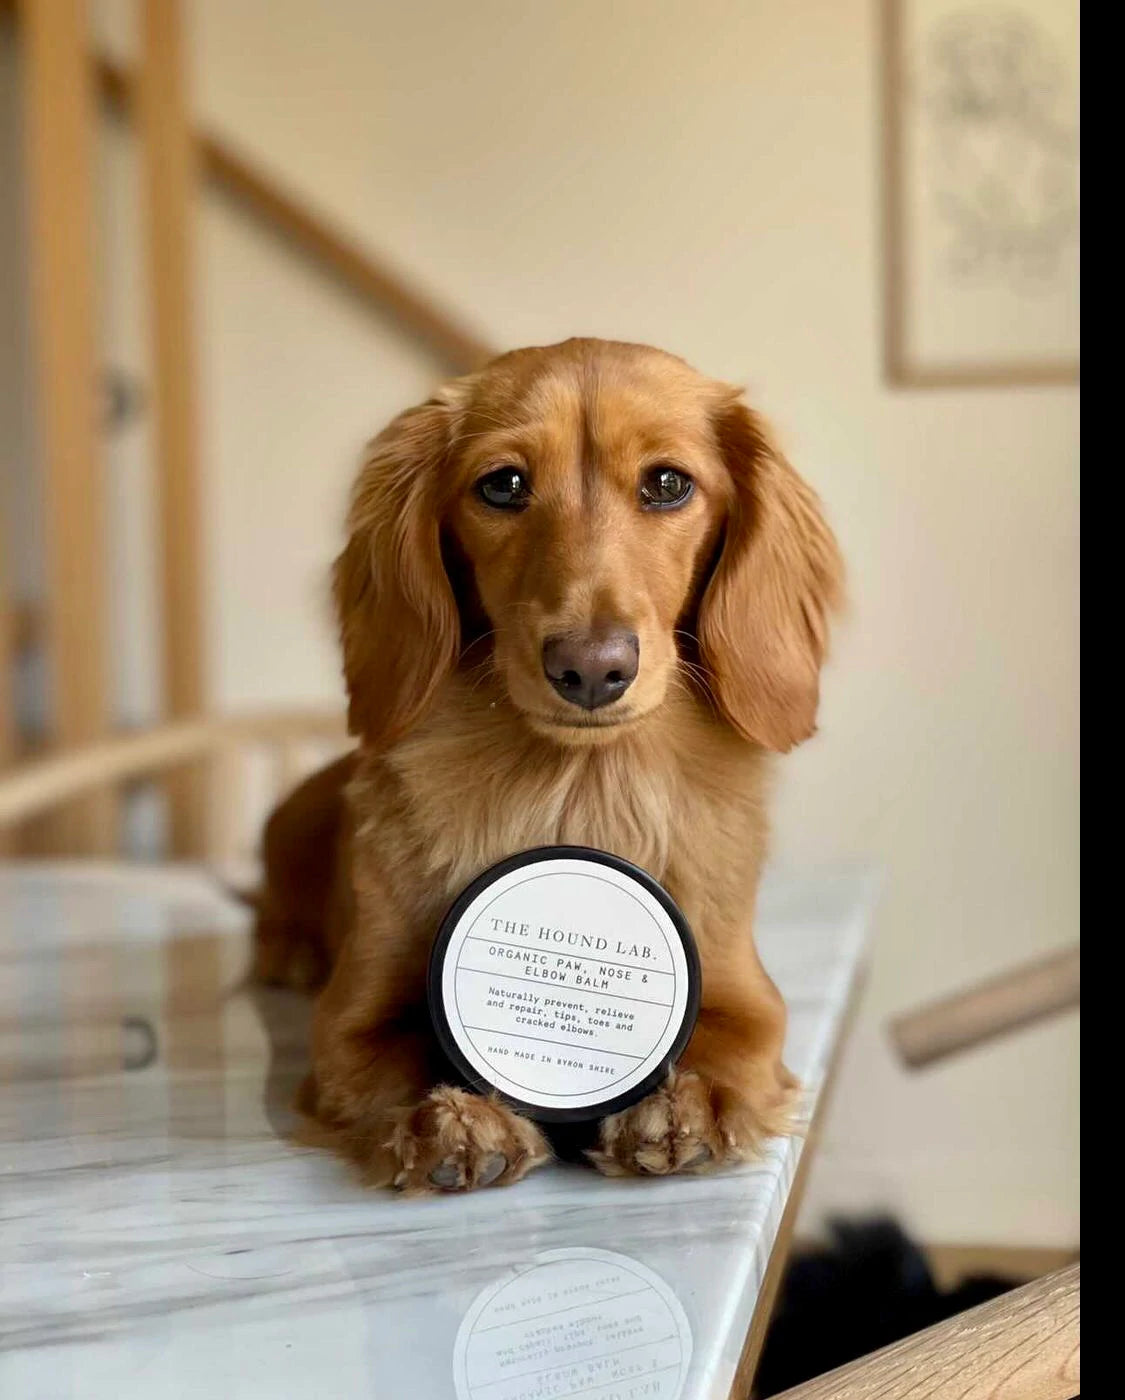 Dog paw balm is made from all natural ingredients